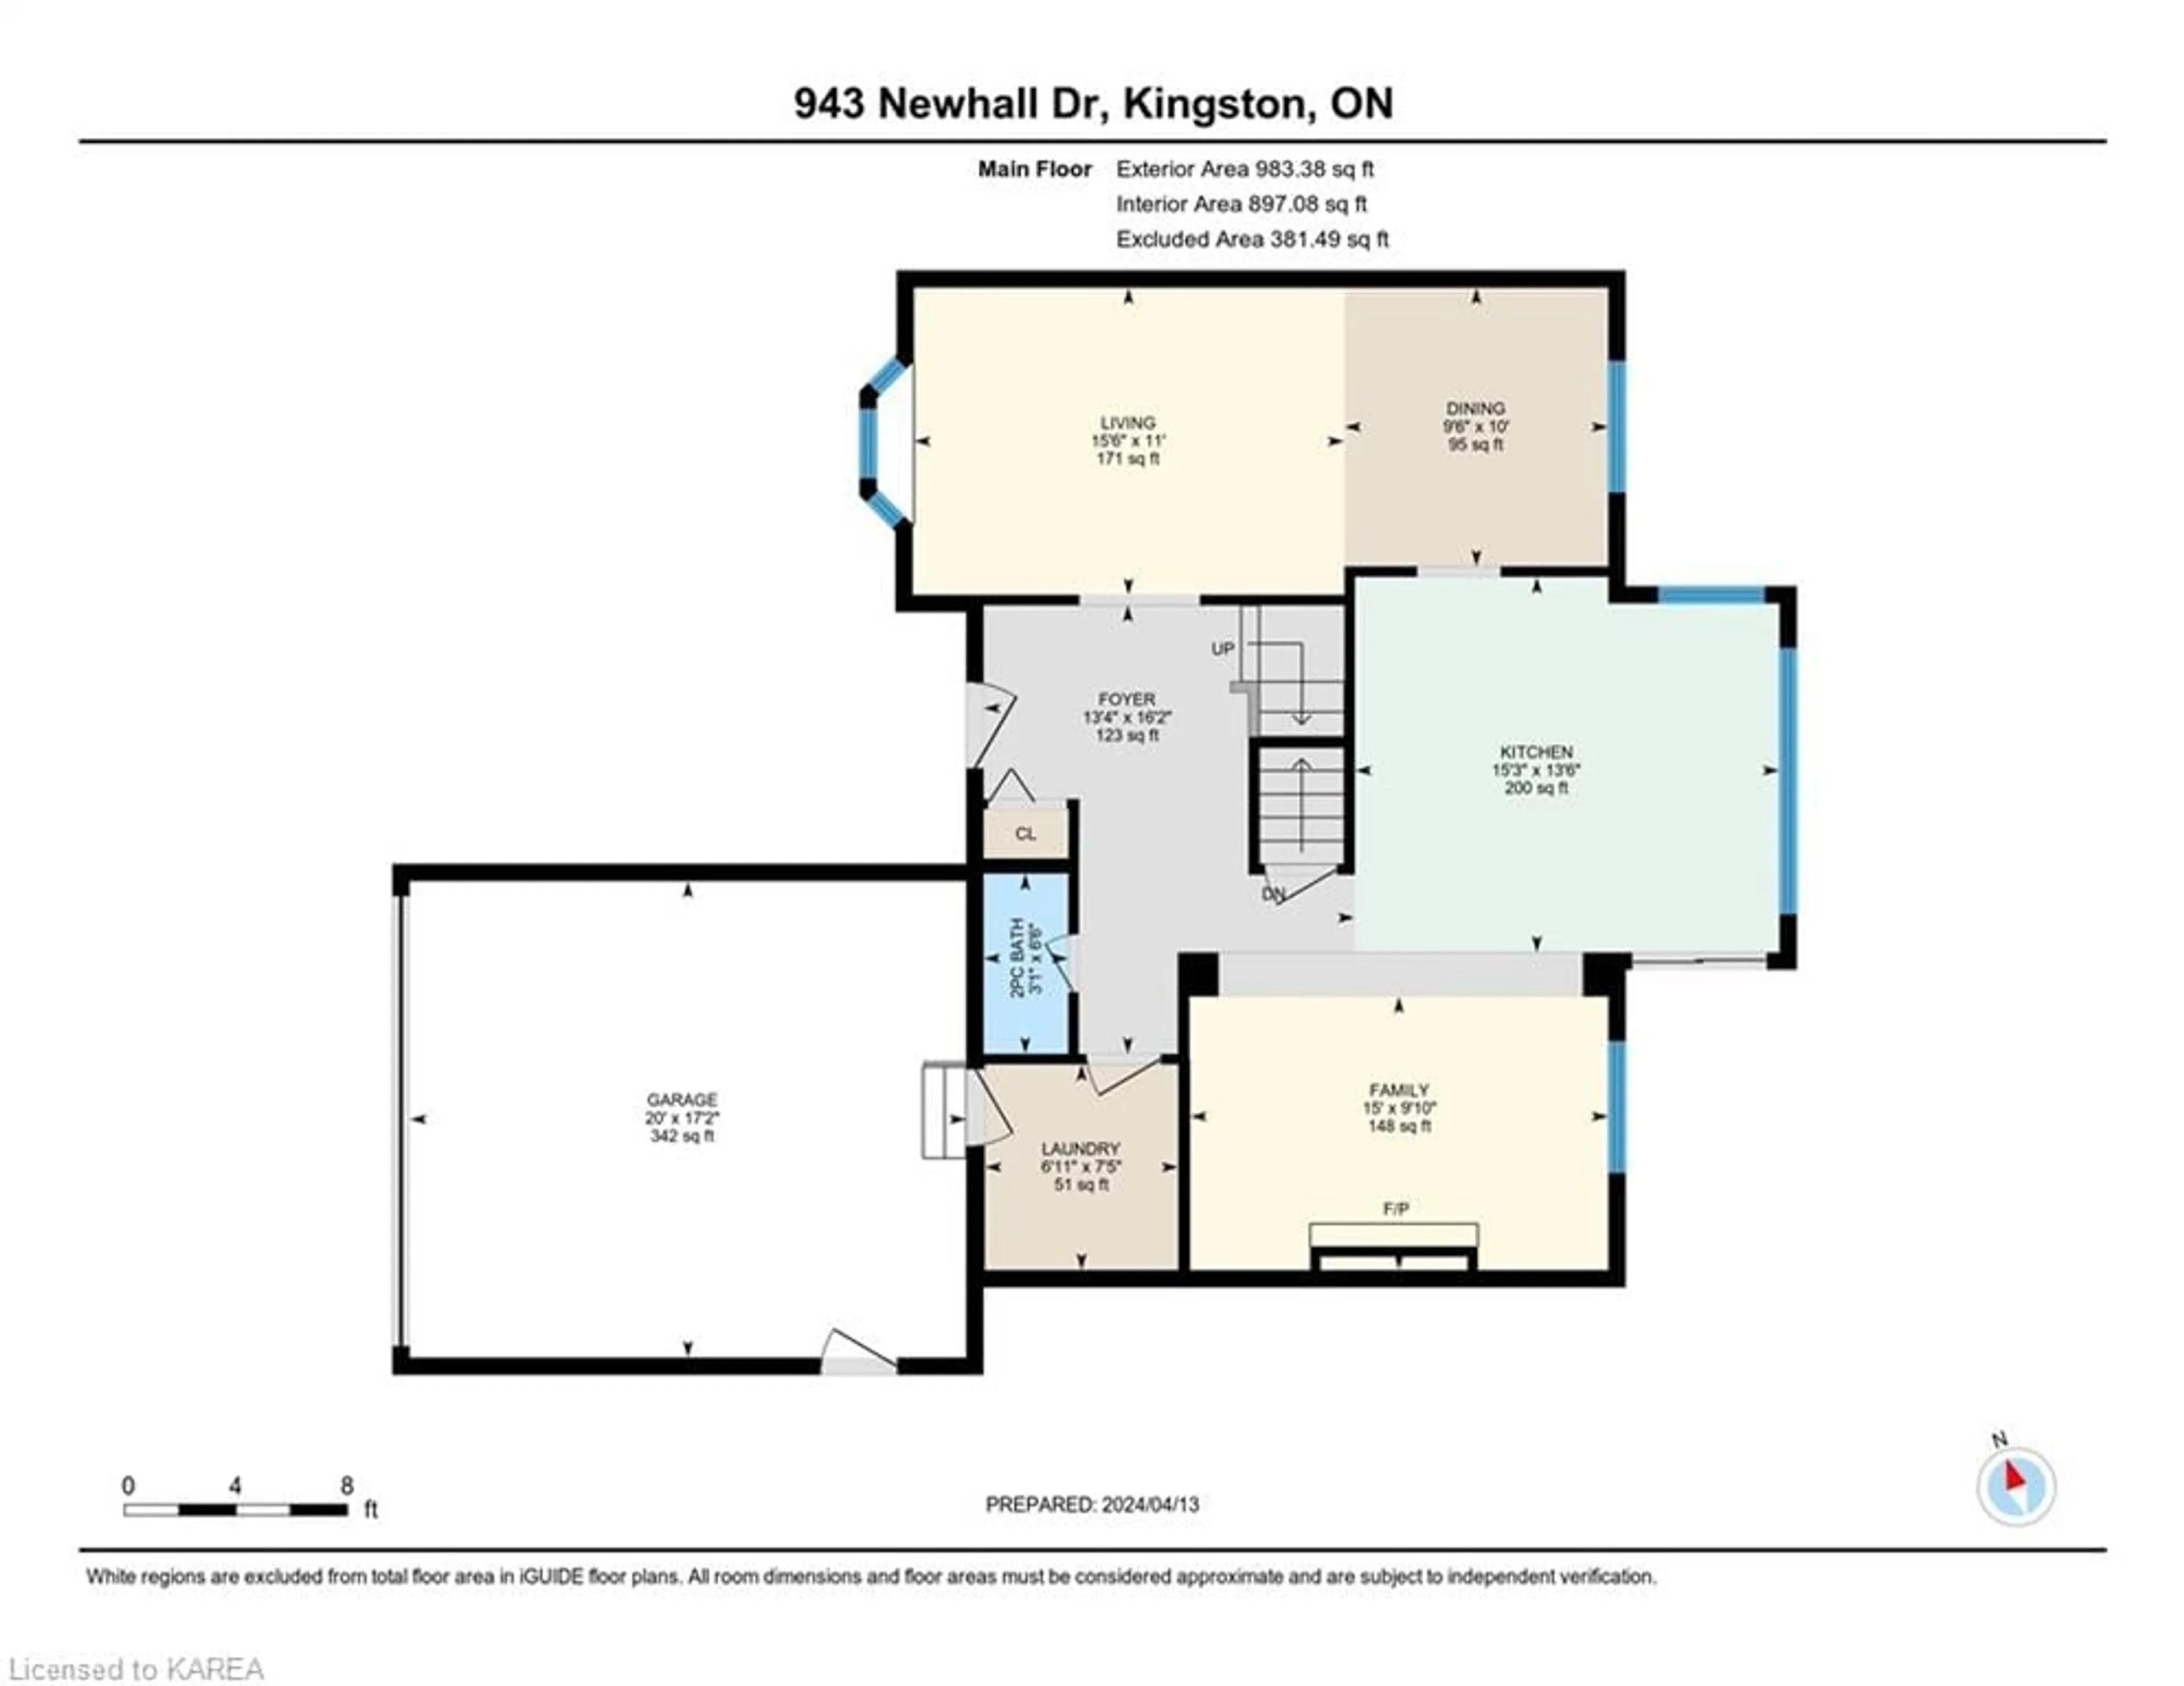 Floor plan for 943 Newhall Dr, Kingston Ontario K7P 2C7